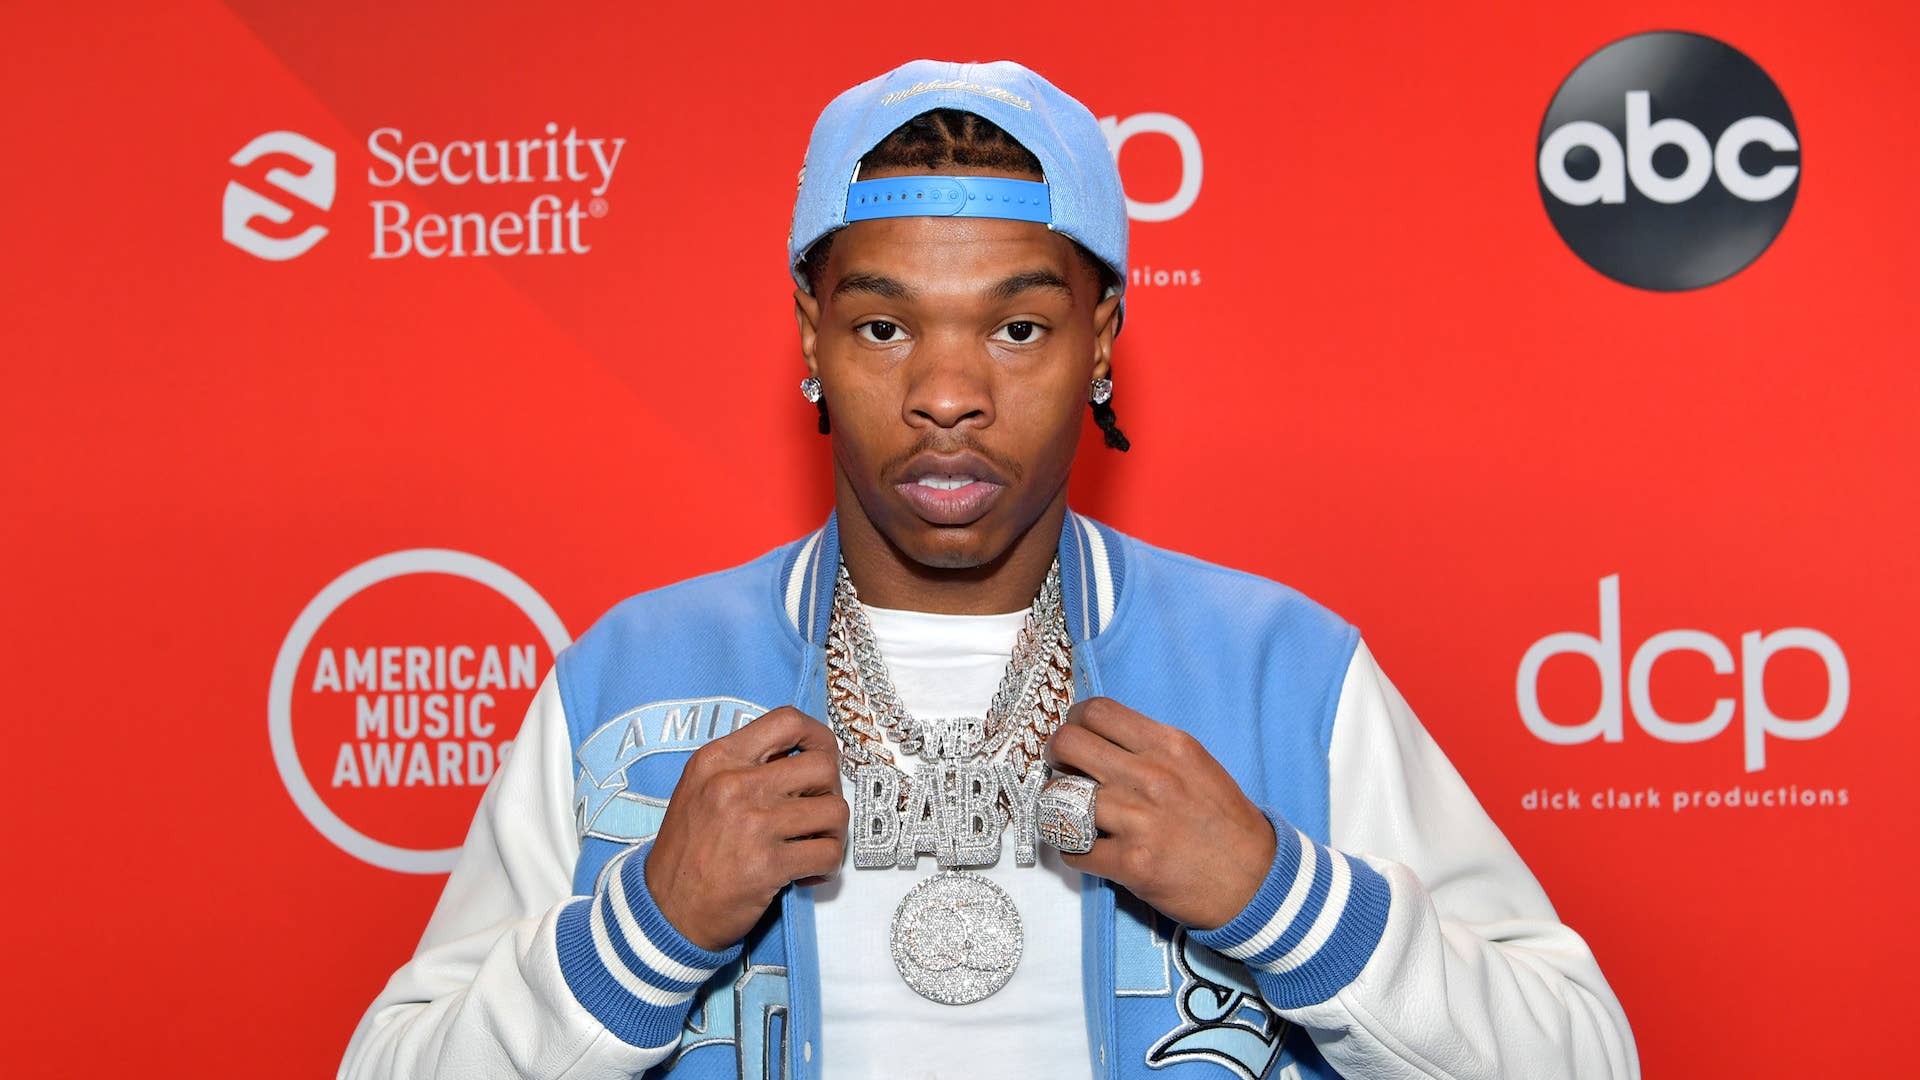 Lil Baby attends the 2020 American Music Awards